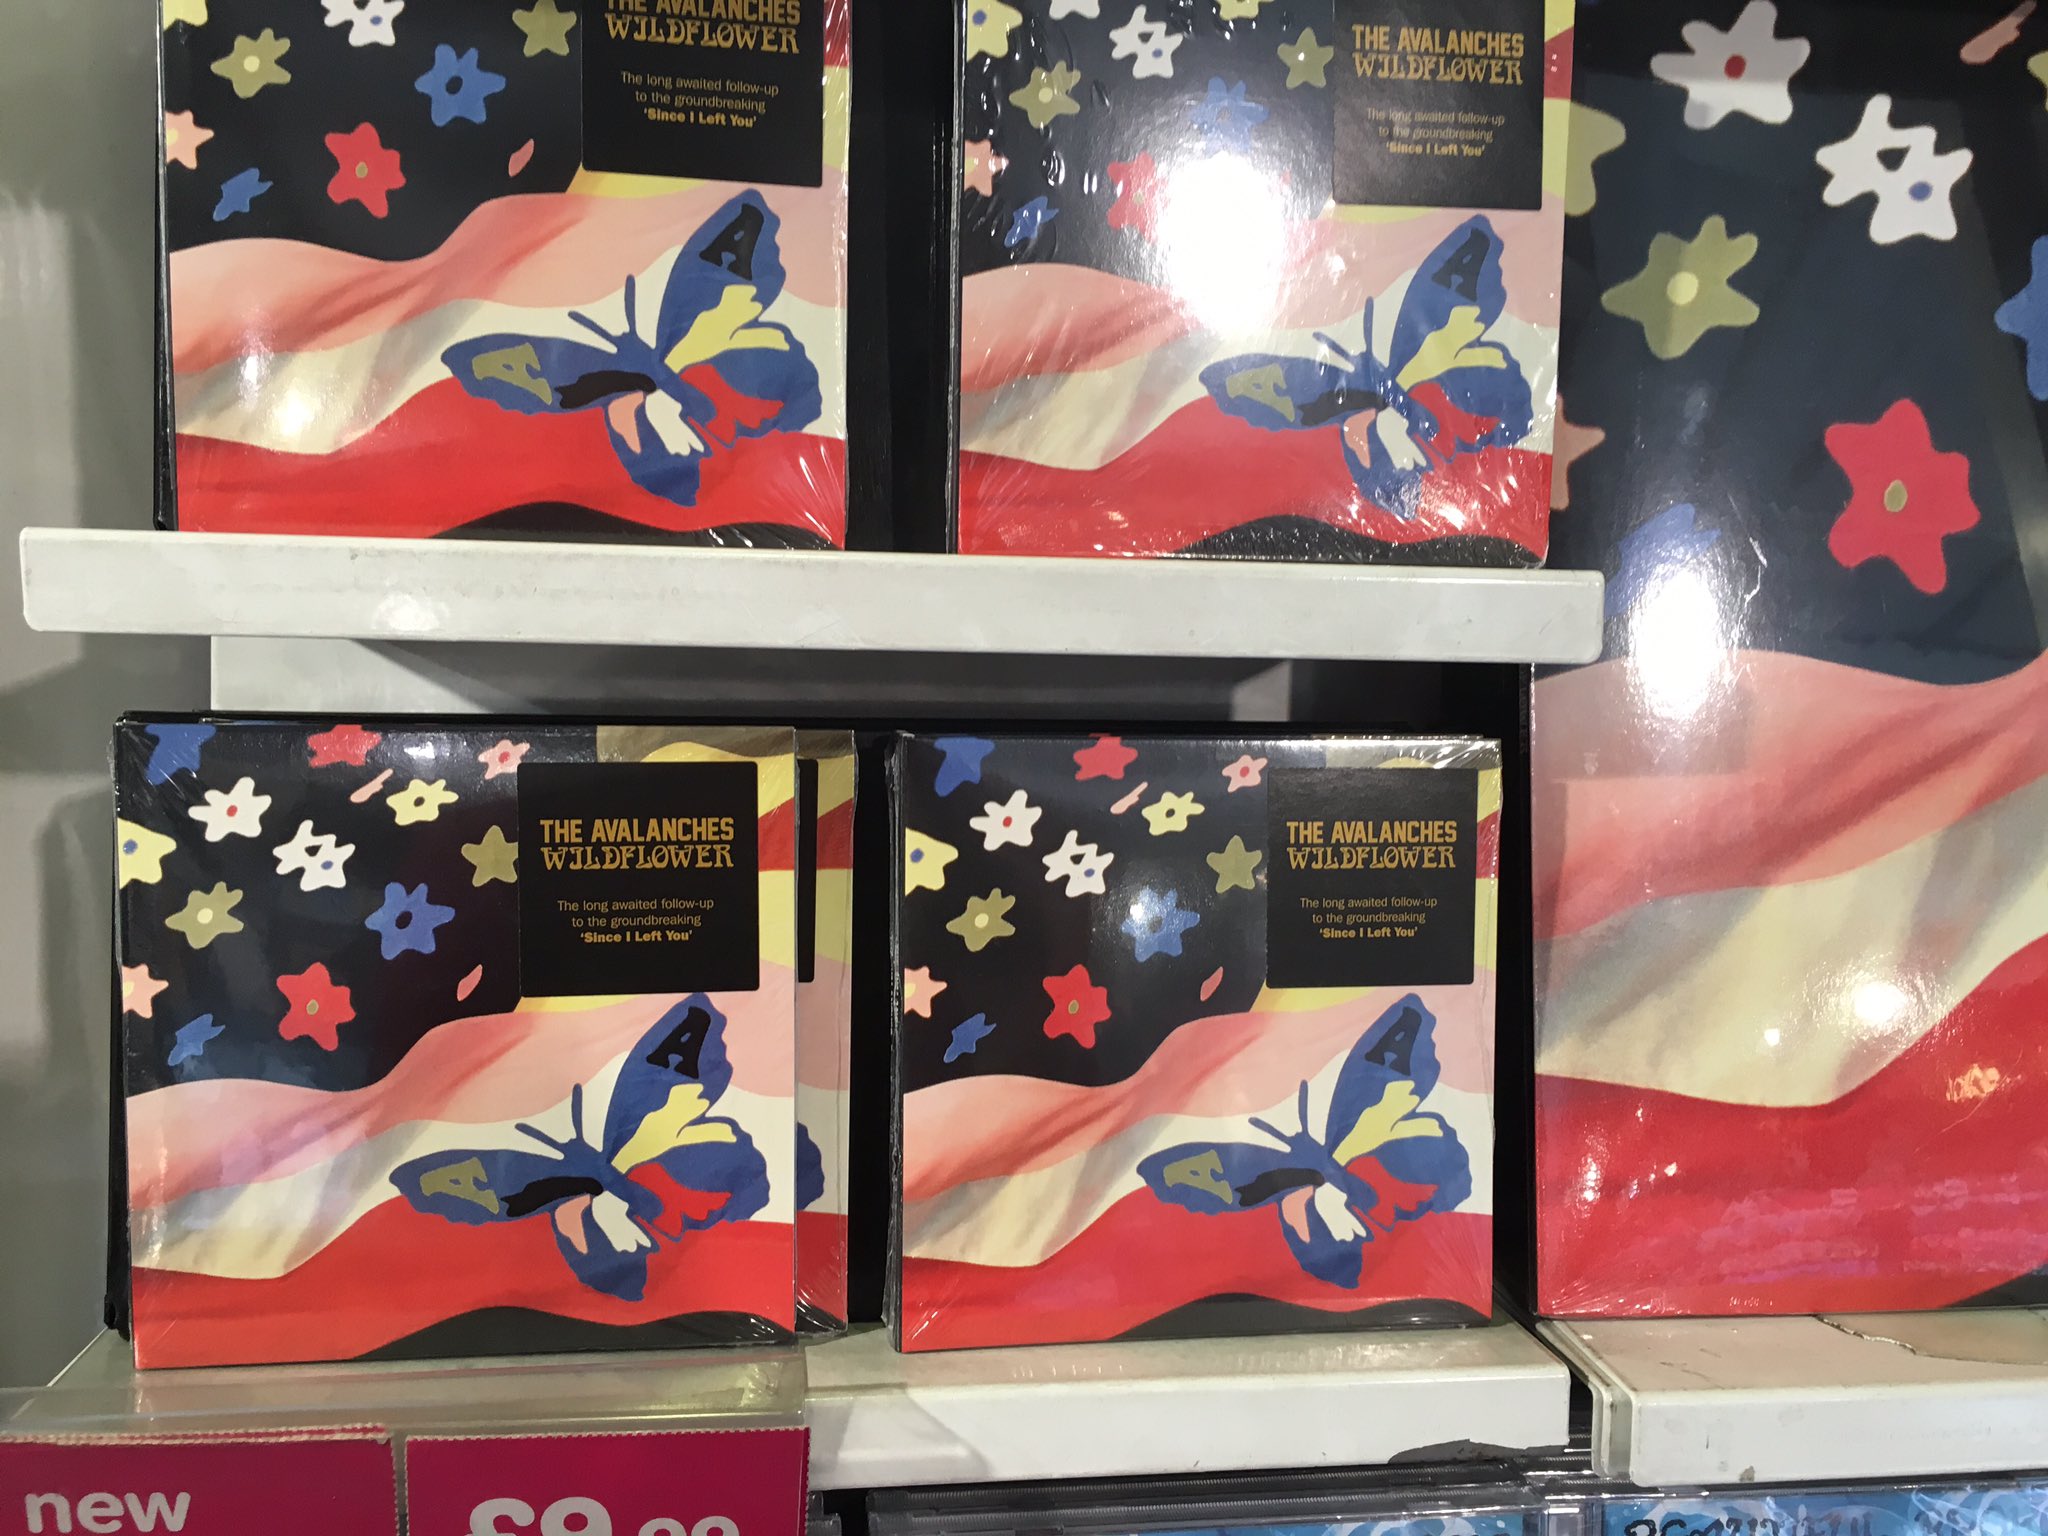 hmv on Twitter: "The Avalanches 'Wildflower' out today cd https://t.co/H0US3C9sm2" / X